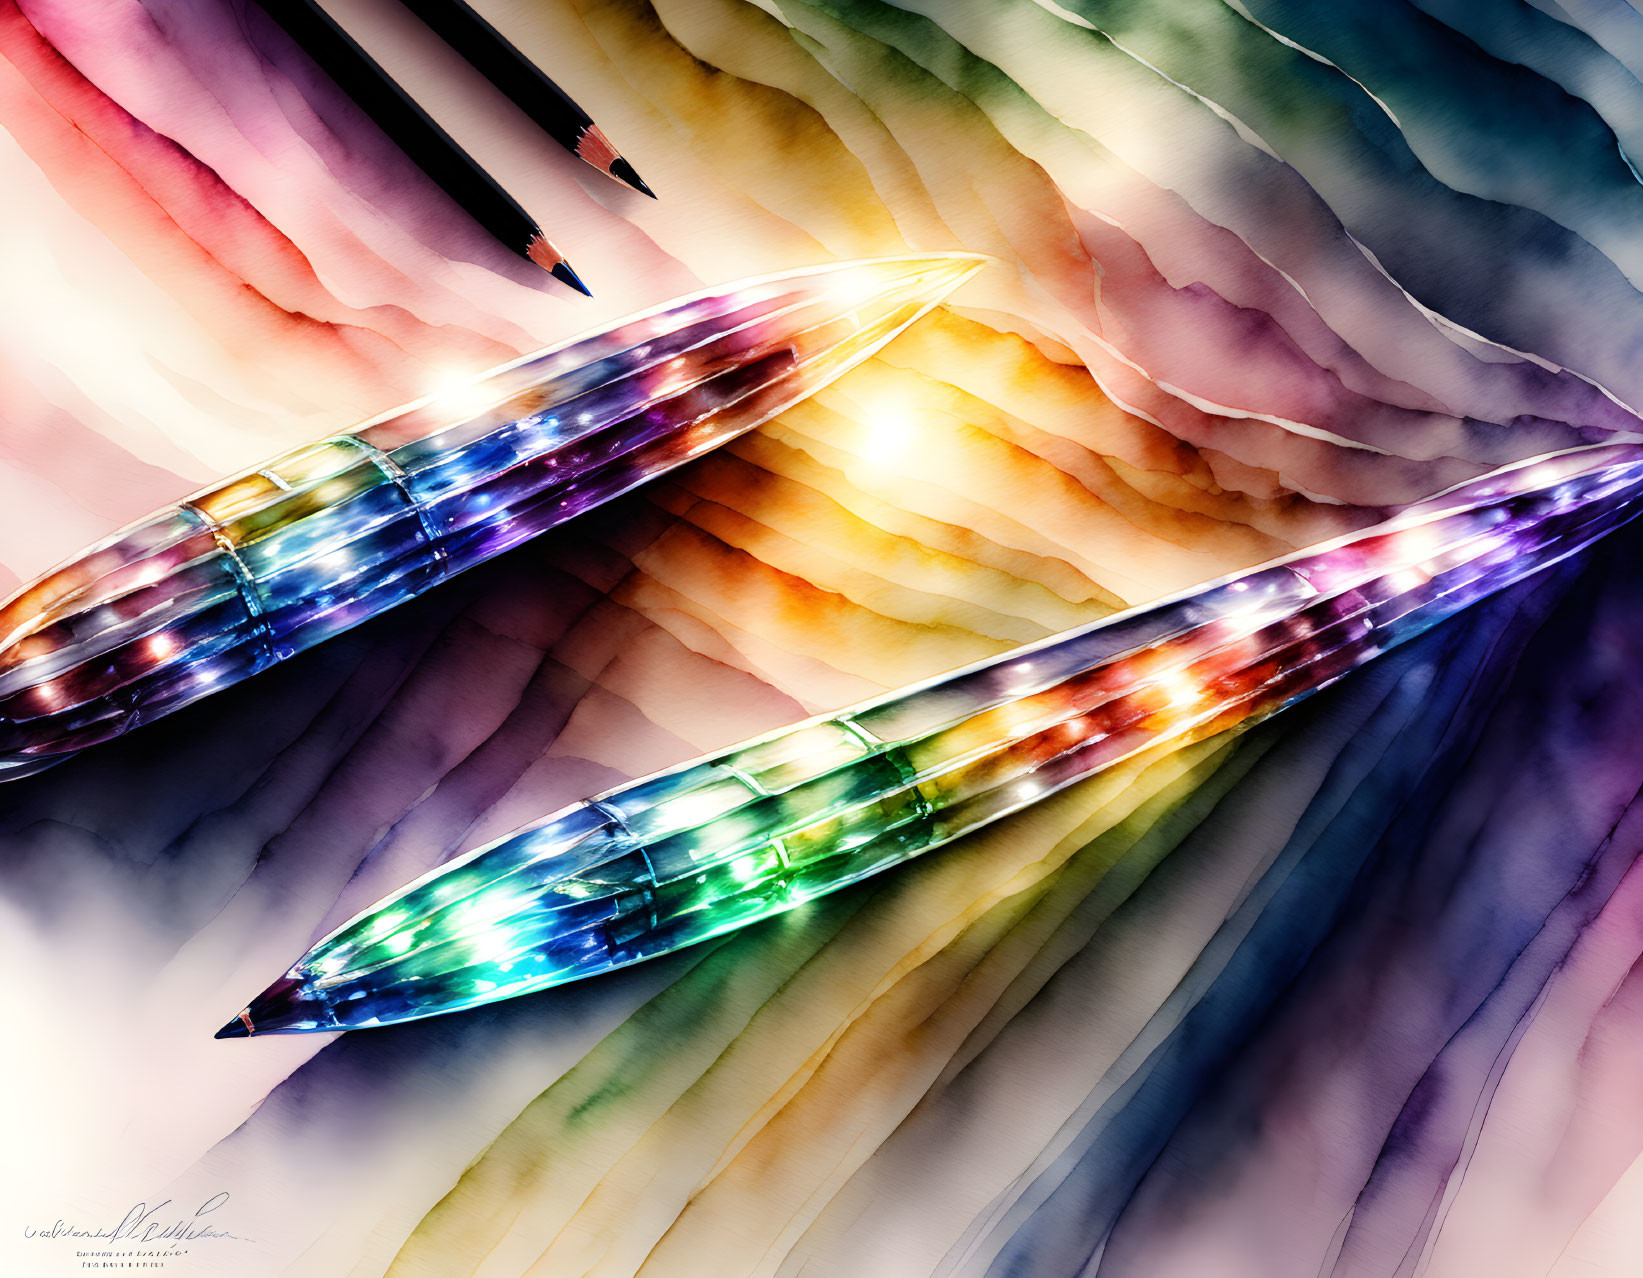 Vibrant Crystalline Pens on Textured Background in Watercolor Style